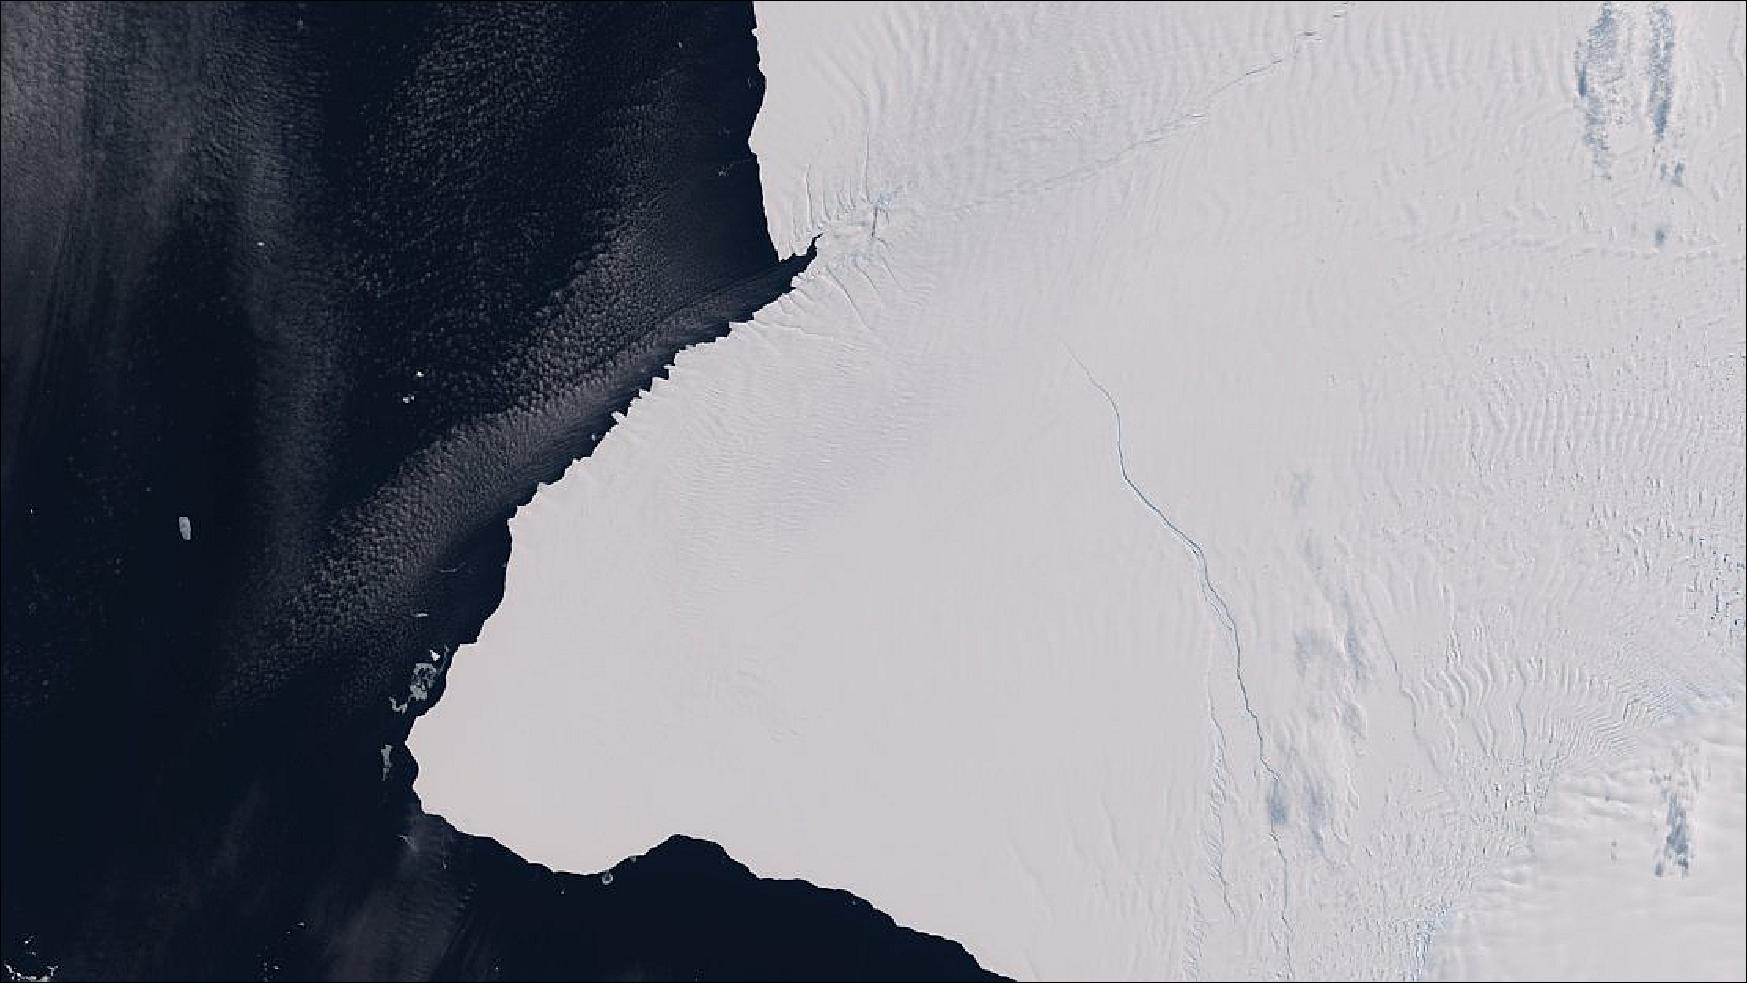 Figure 31: Cracks cutting across Antarctica’s Brunt ice shelf are on course to truncate the shelf and release an iceberg about the size of Greater London. The Brunt ice shelf is an area of floating ice bordering the Coats Land coast in the Weddell Sea sector of Antarctica (image credit: ESA, the image contains modified Copernicus Sentinel data (2019), processed by ESA, CC BY-SA 3.0 IGO)